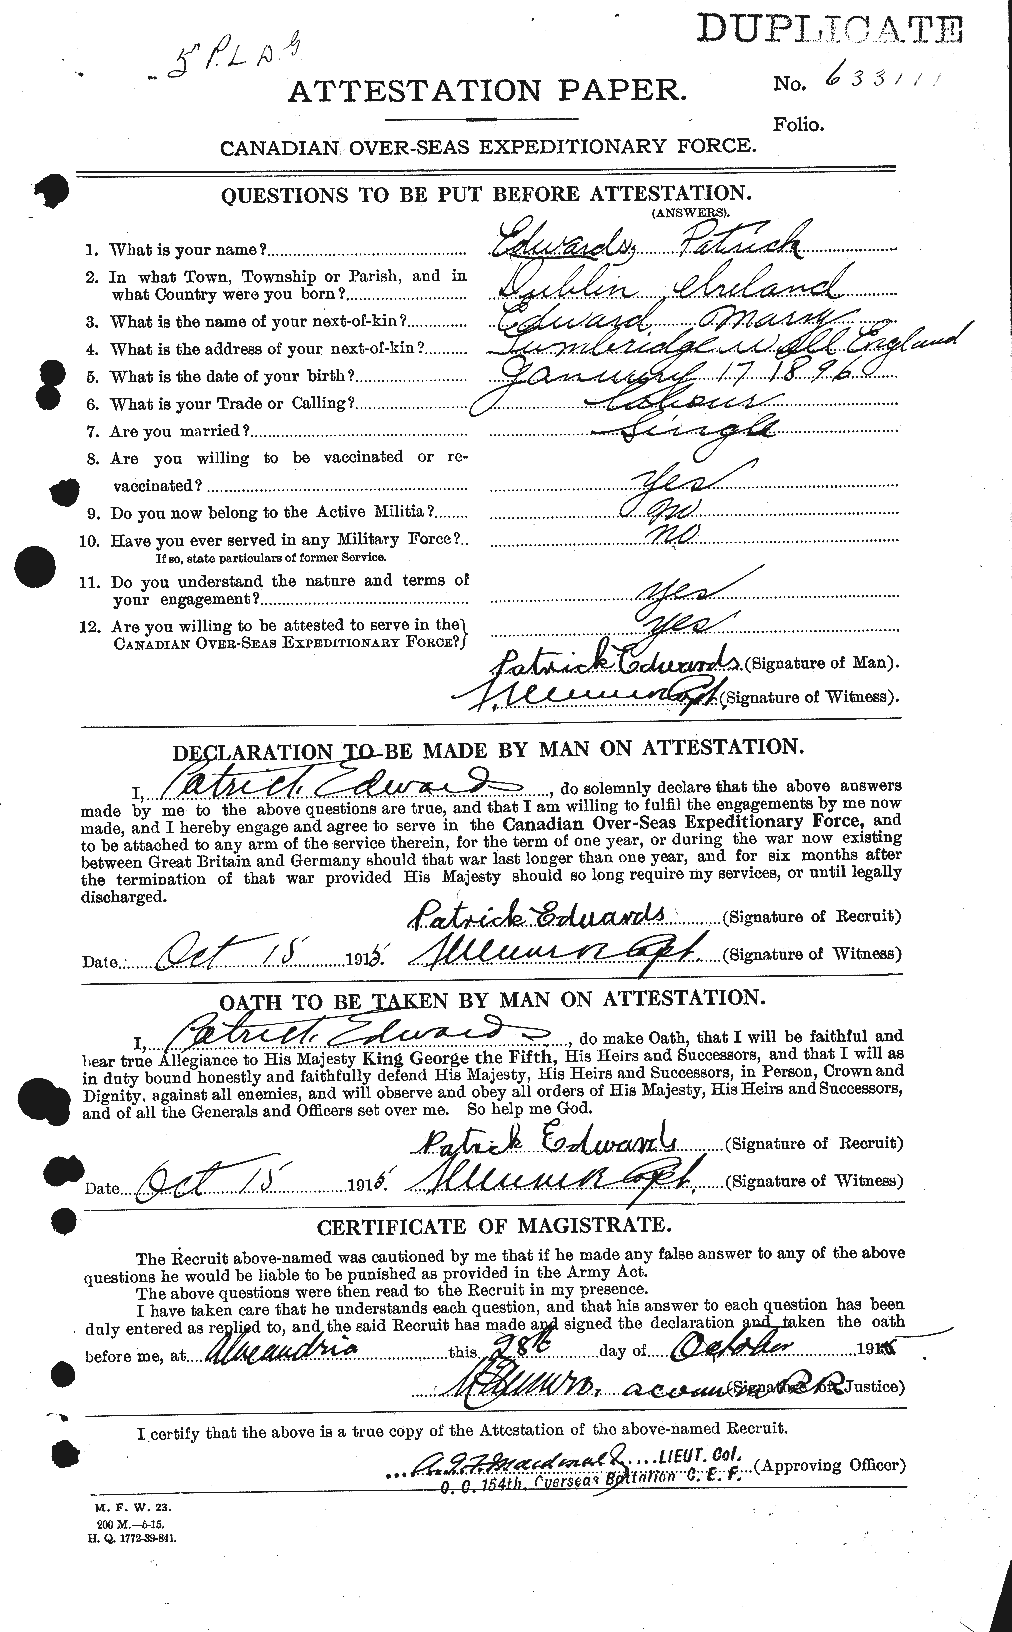 Personnel Records of the First World War - CEF 310231a